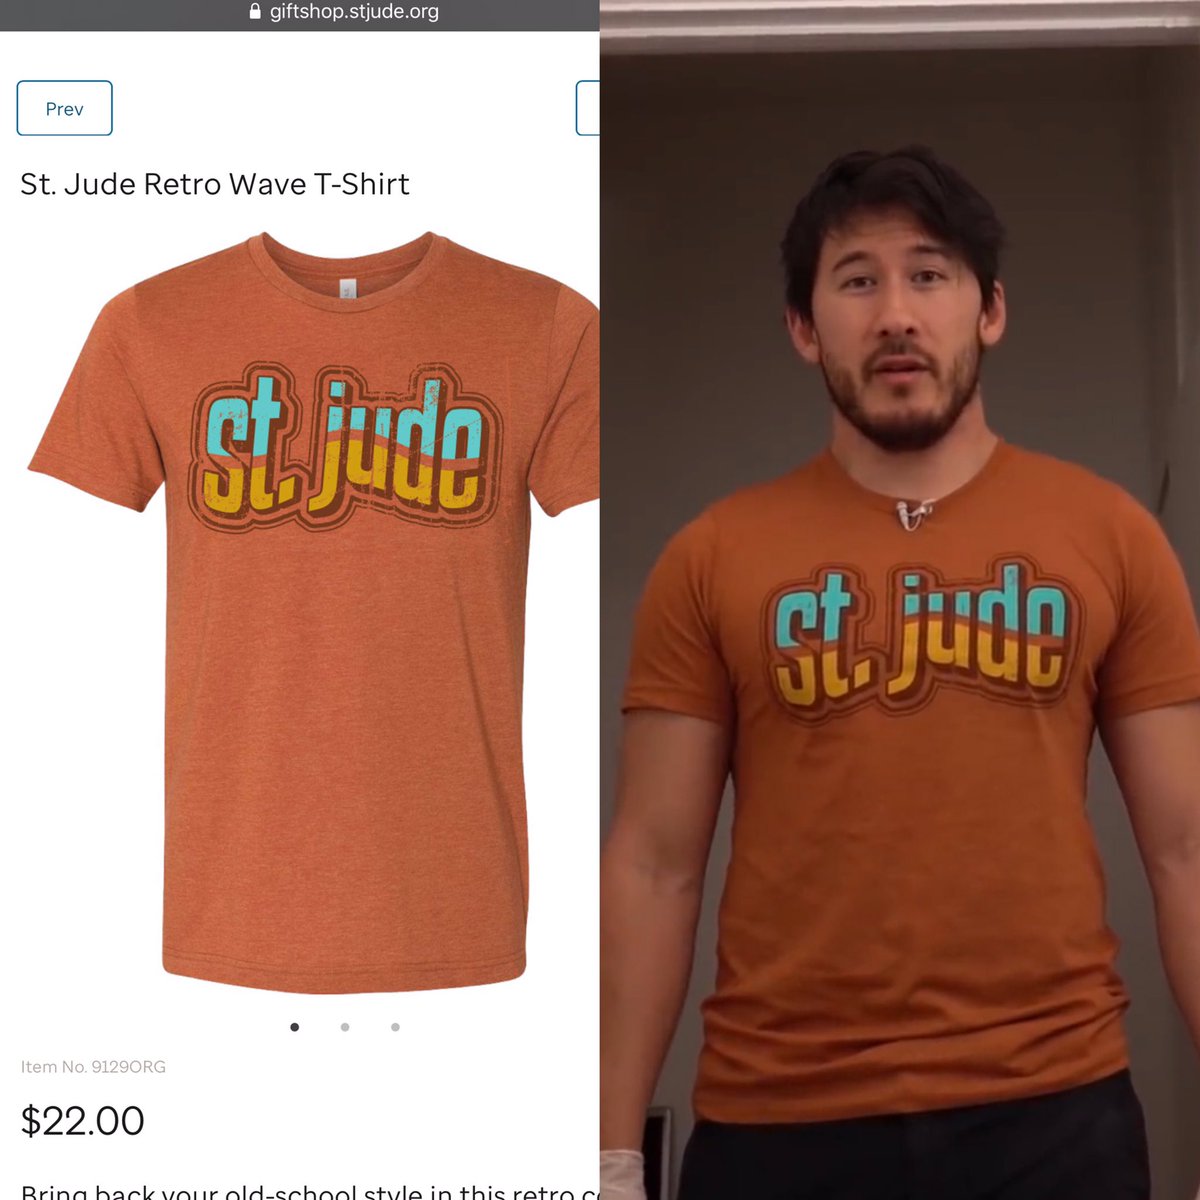 Alright so this one is actually still for sale and really cheap! It’s the St. Jude Retro Wave t-shirt! This tee supports the St. Jude research hospital, a great cause! To be honest Mark makes this look so good and less plain or something? Here’s the link!  https://giftshop.stjude.org/st.-jude-retro-wave-t-shirt/9129ORG.html?cgid=him-clothing#start=2